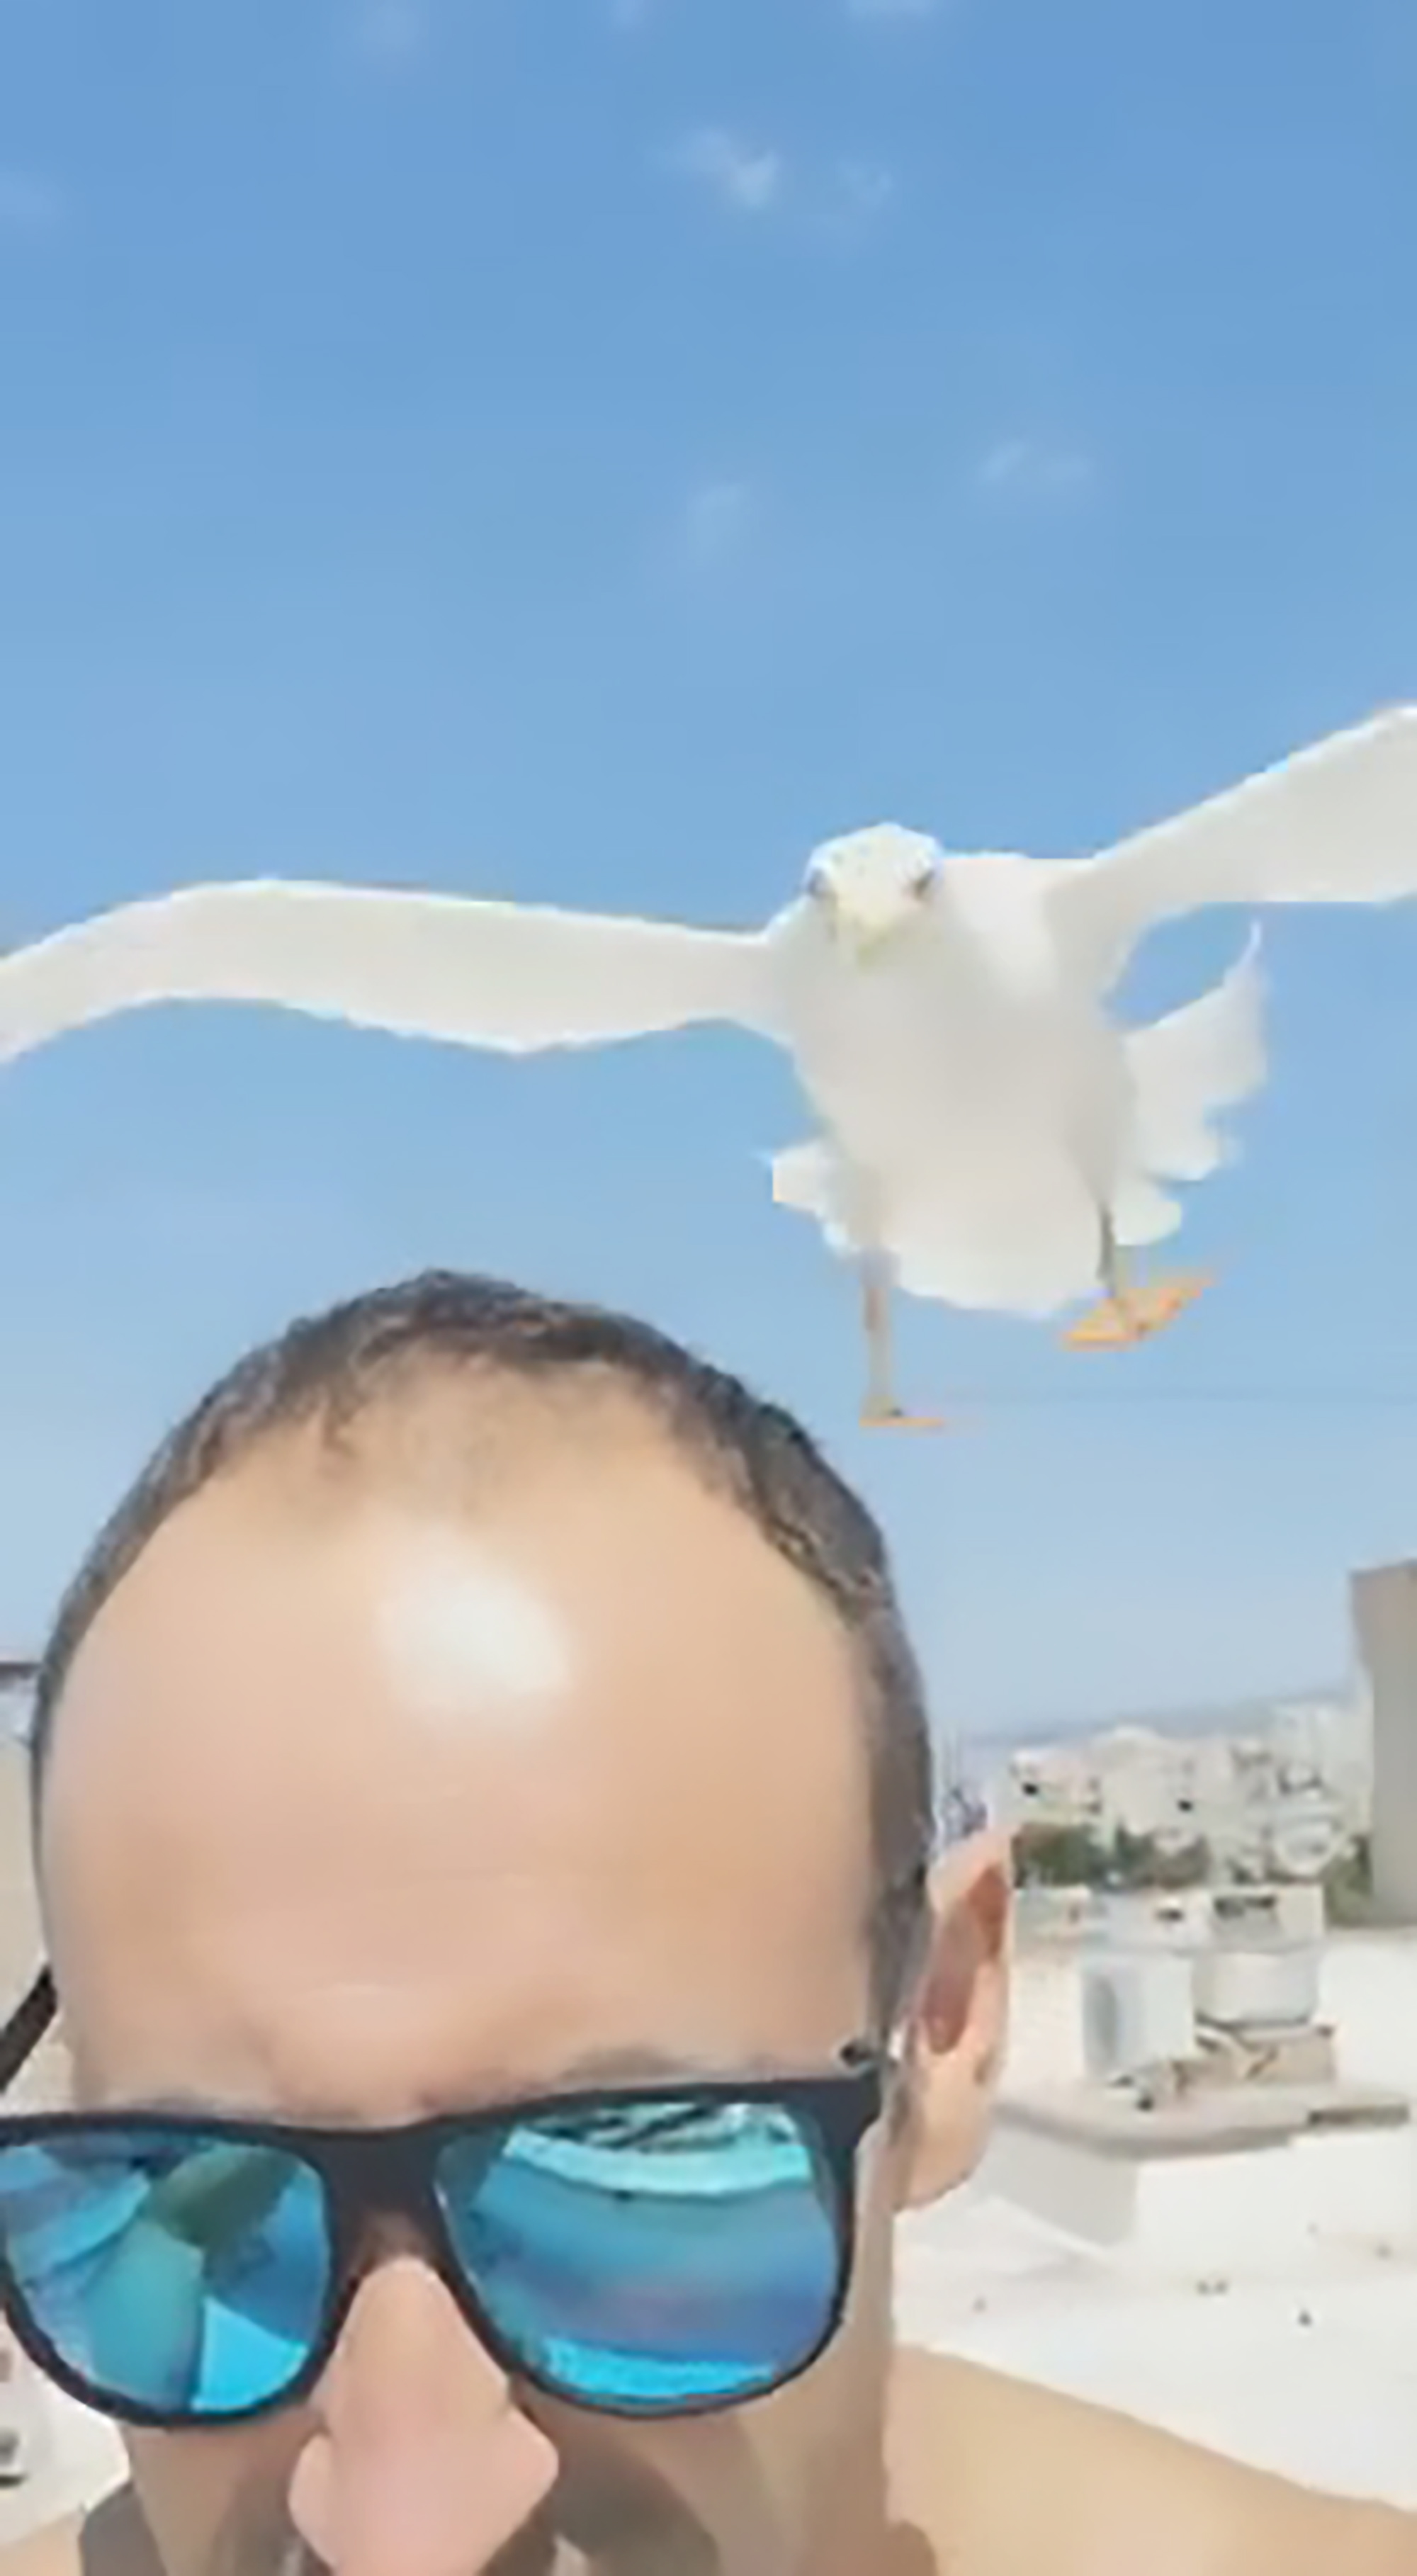 Read more about the article Seagull Dive-Bombs Selfie-Taking Man In Tourist Hotspot